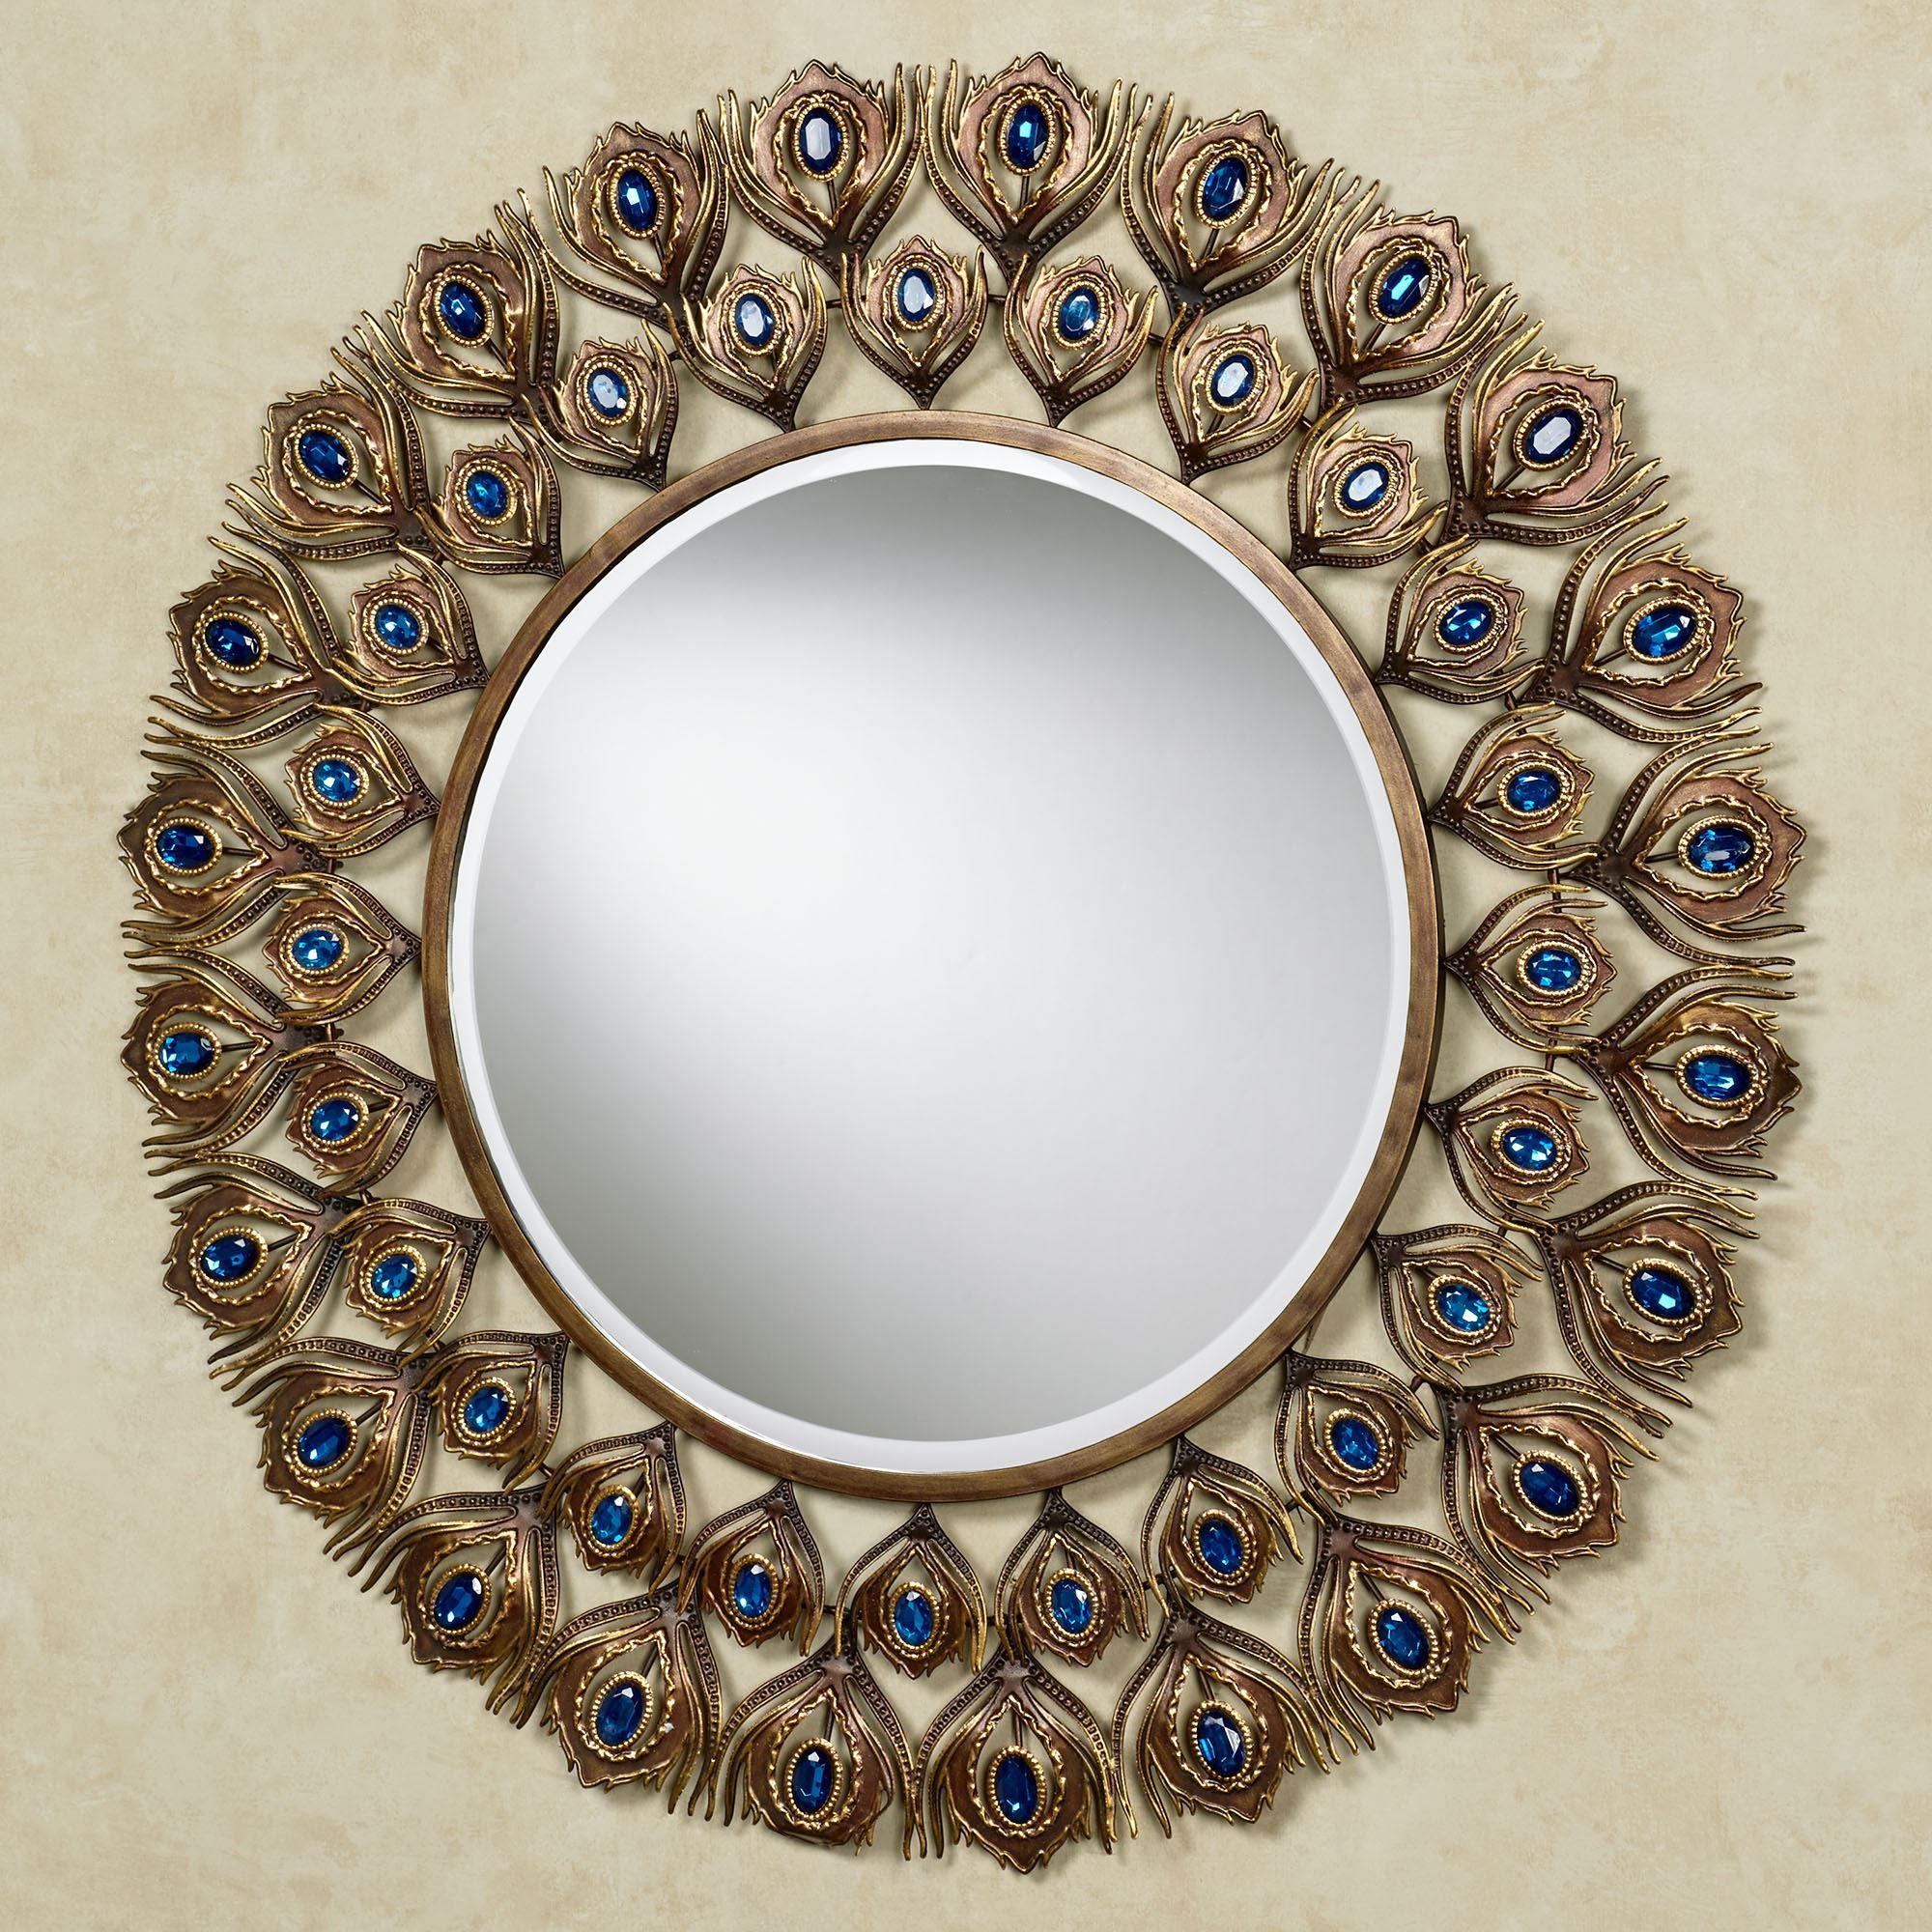 Scalloped Round Wall Mirrors With Well Liked Royal Peacock Jeweled Round Wall Mirror (View 6 of 15)